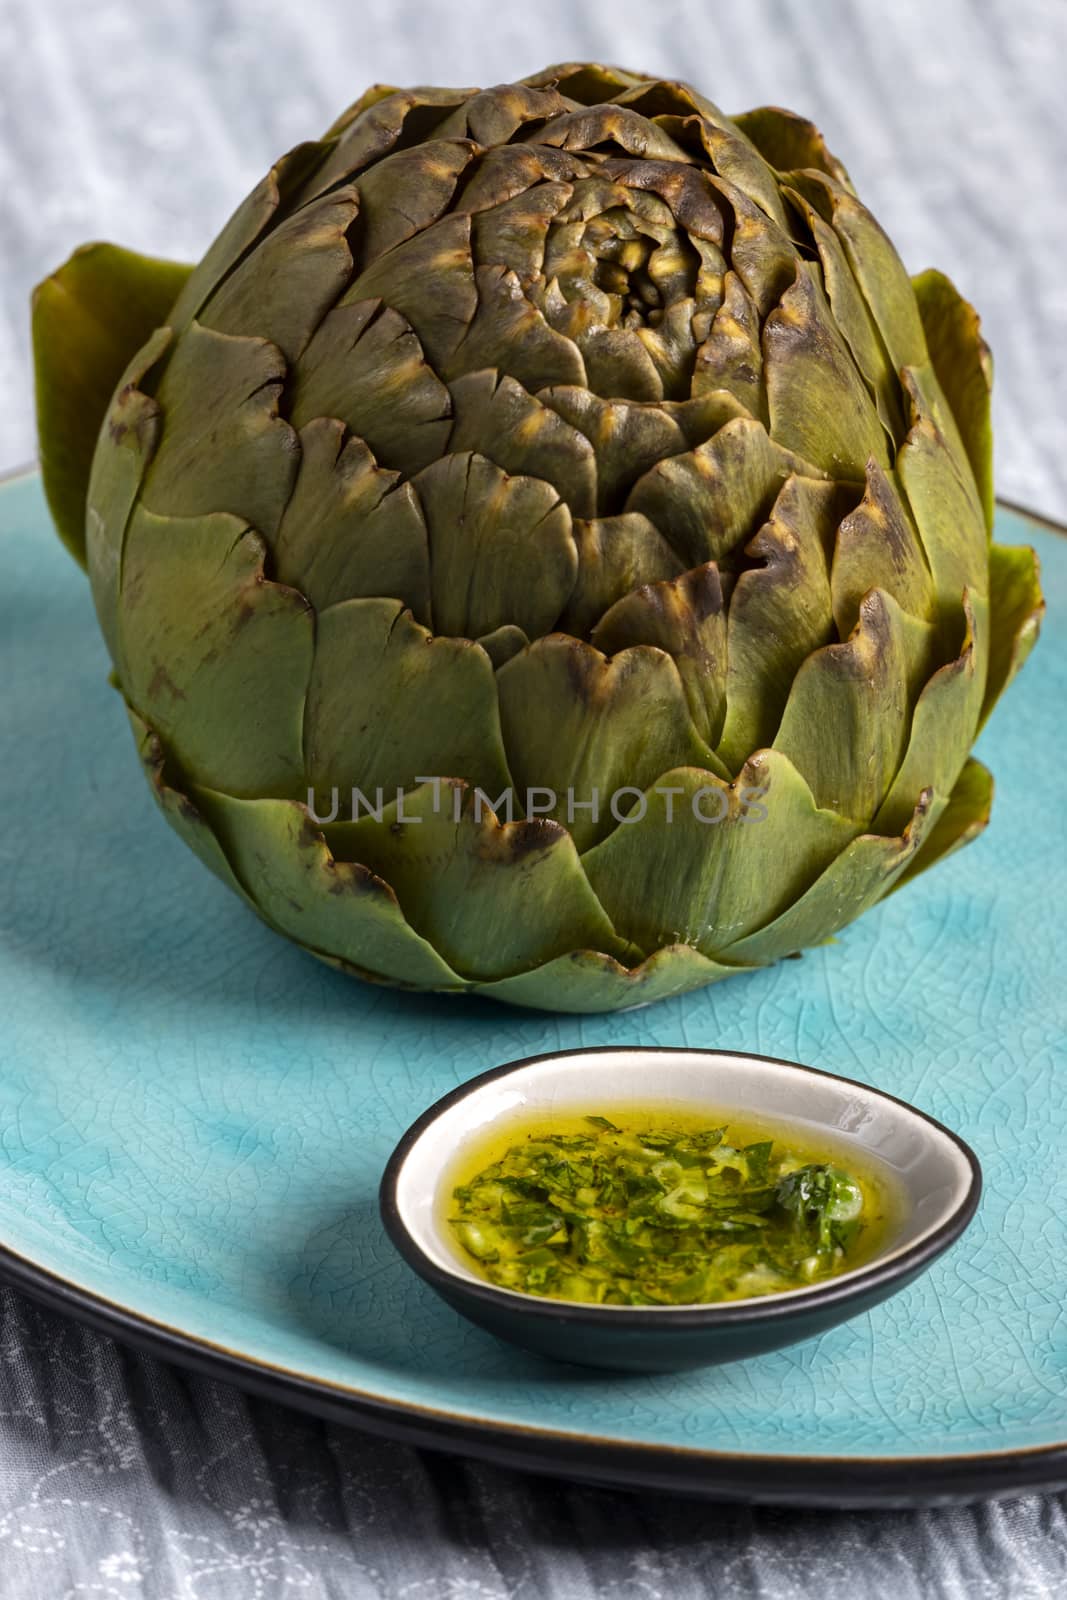 cooked artichoke on a blue plate